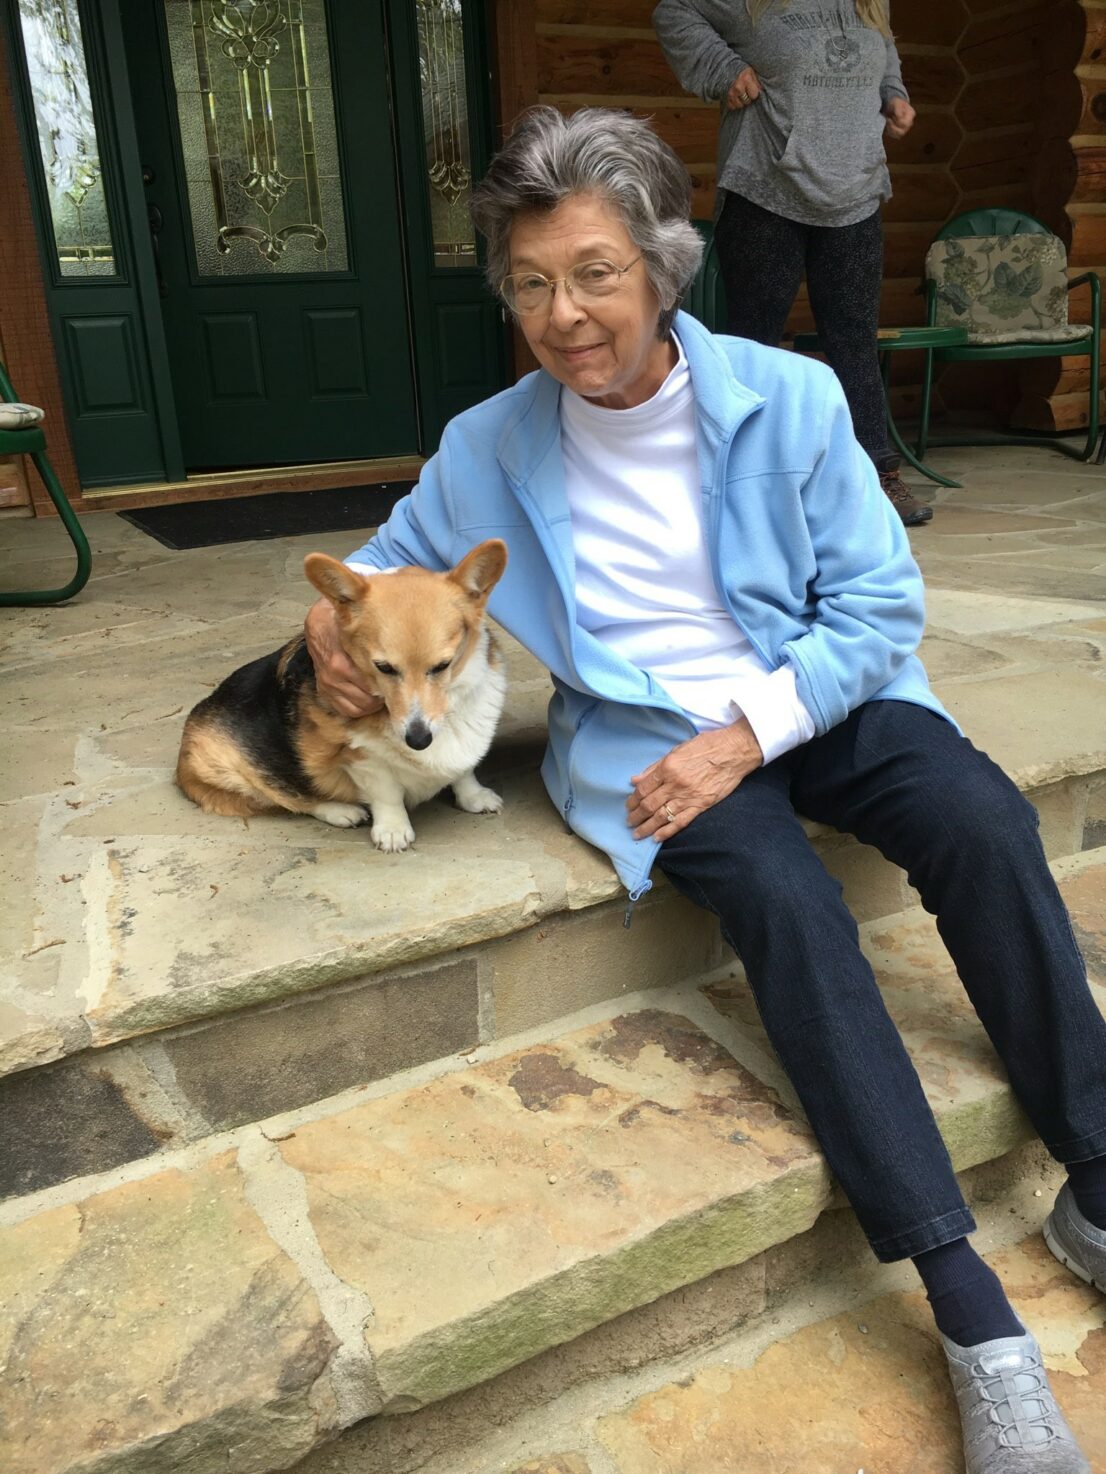 Jane Ketcher with her dog